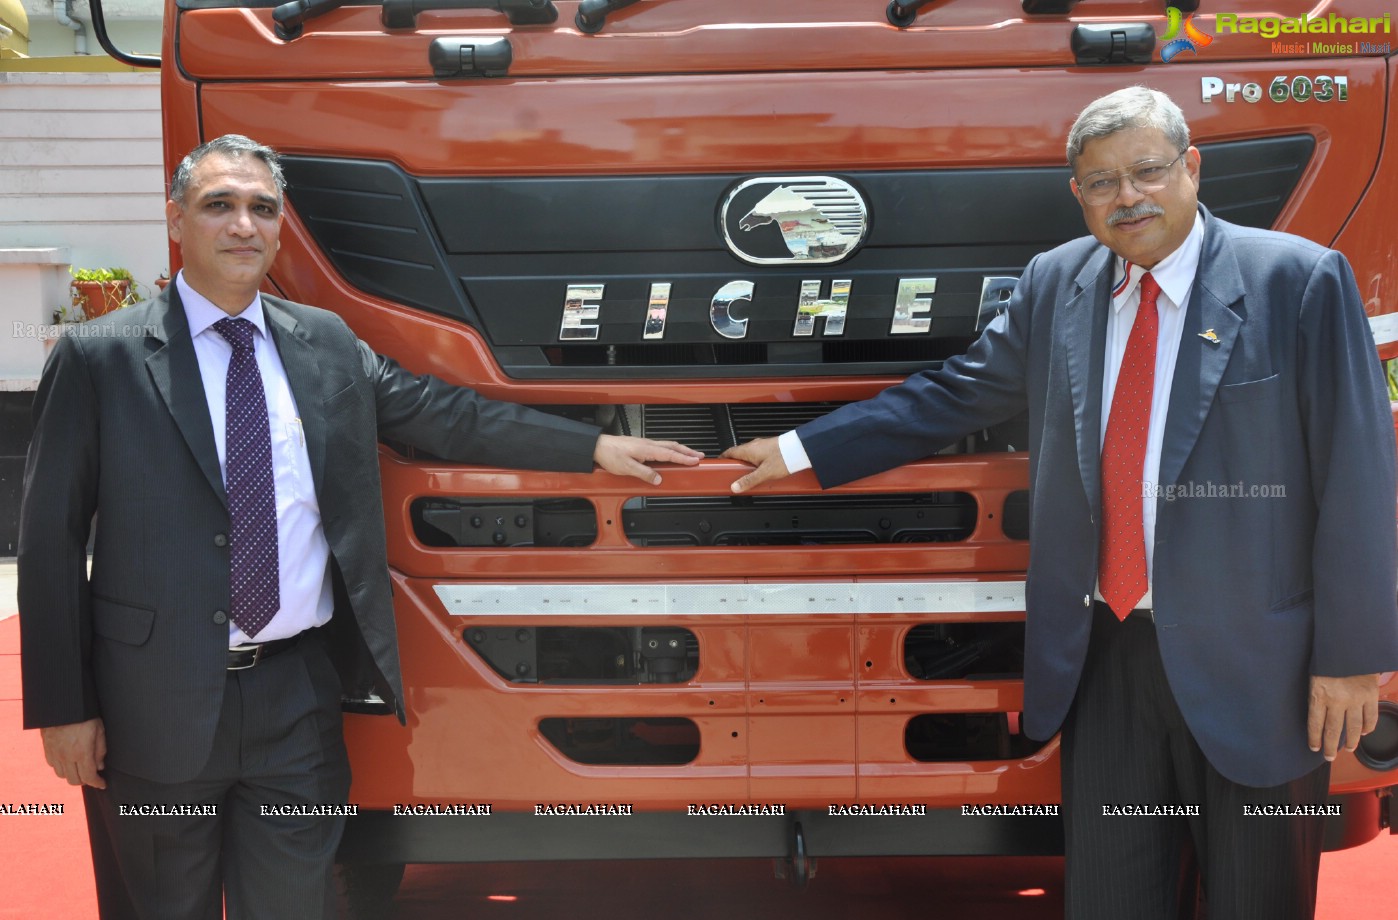 Eicher launches Pro 6000 series in Andhra Pradesh